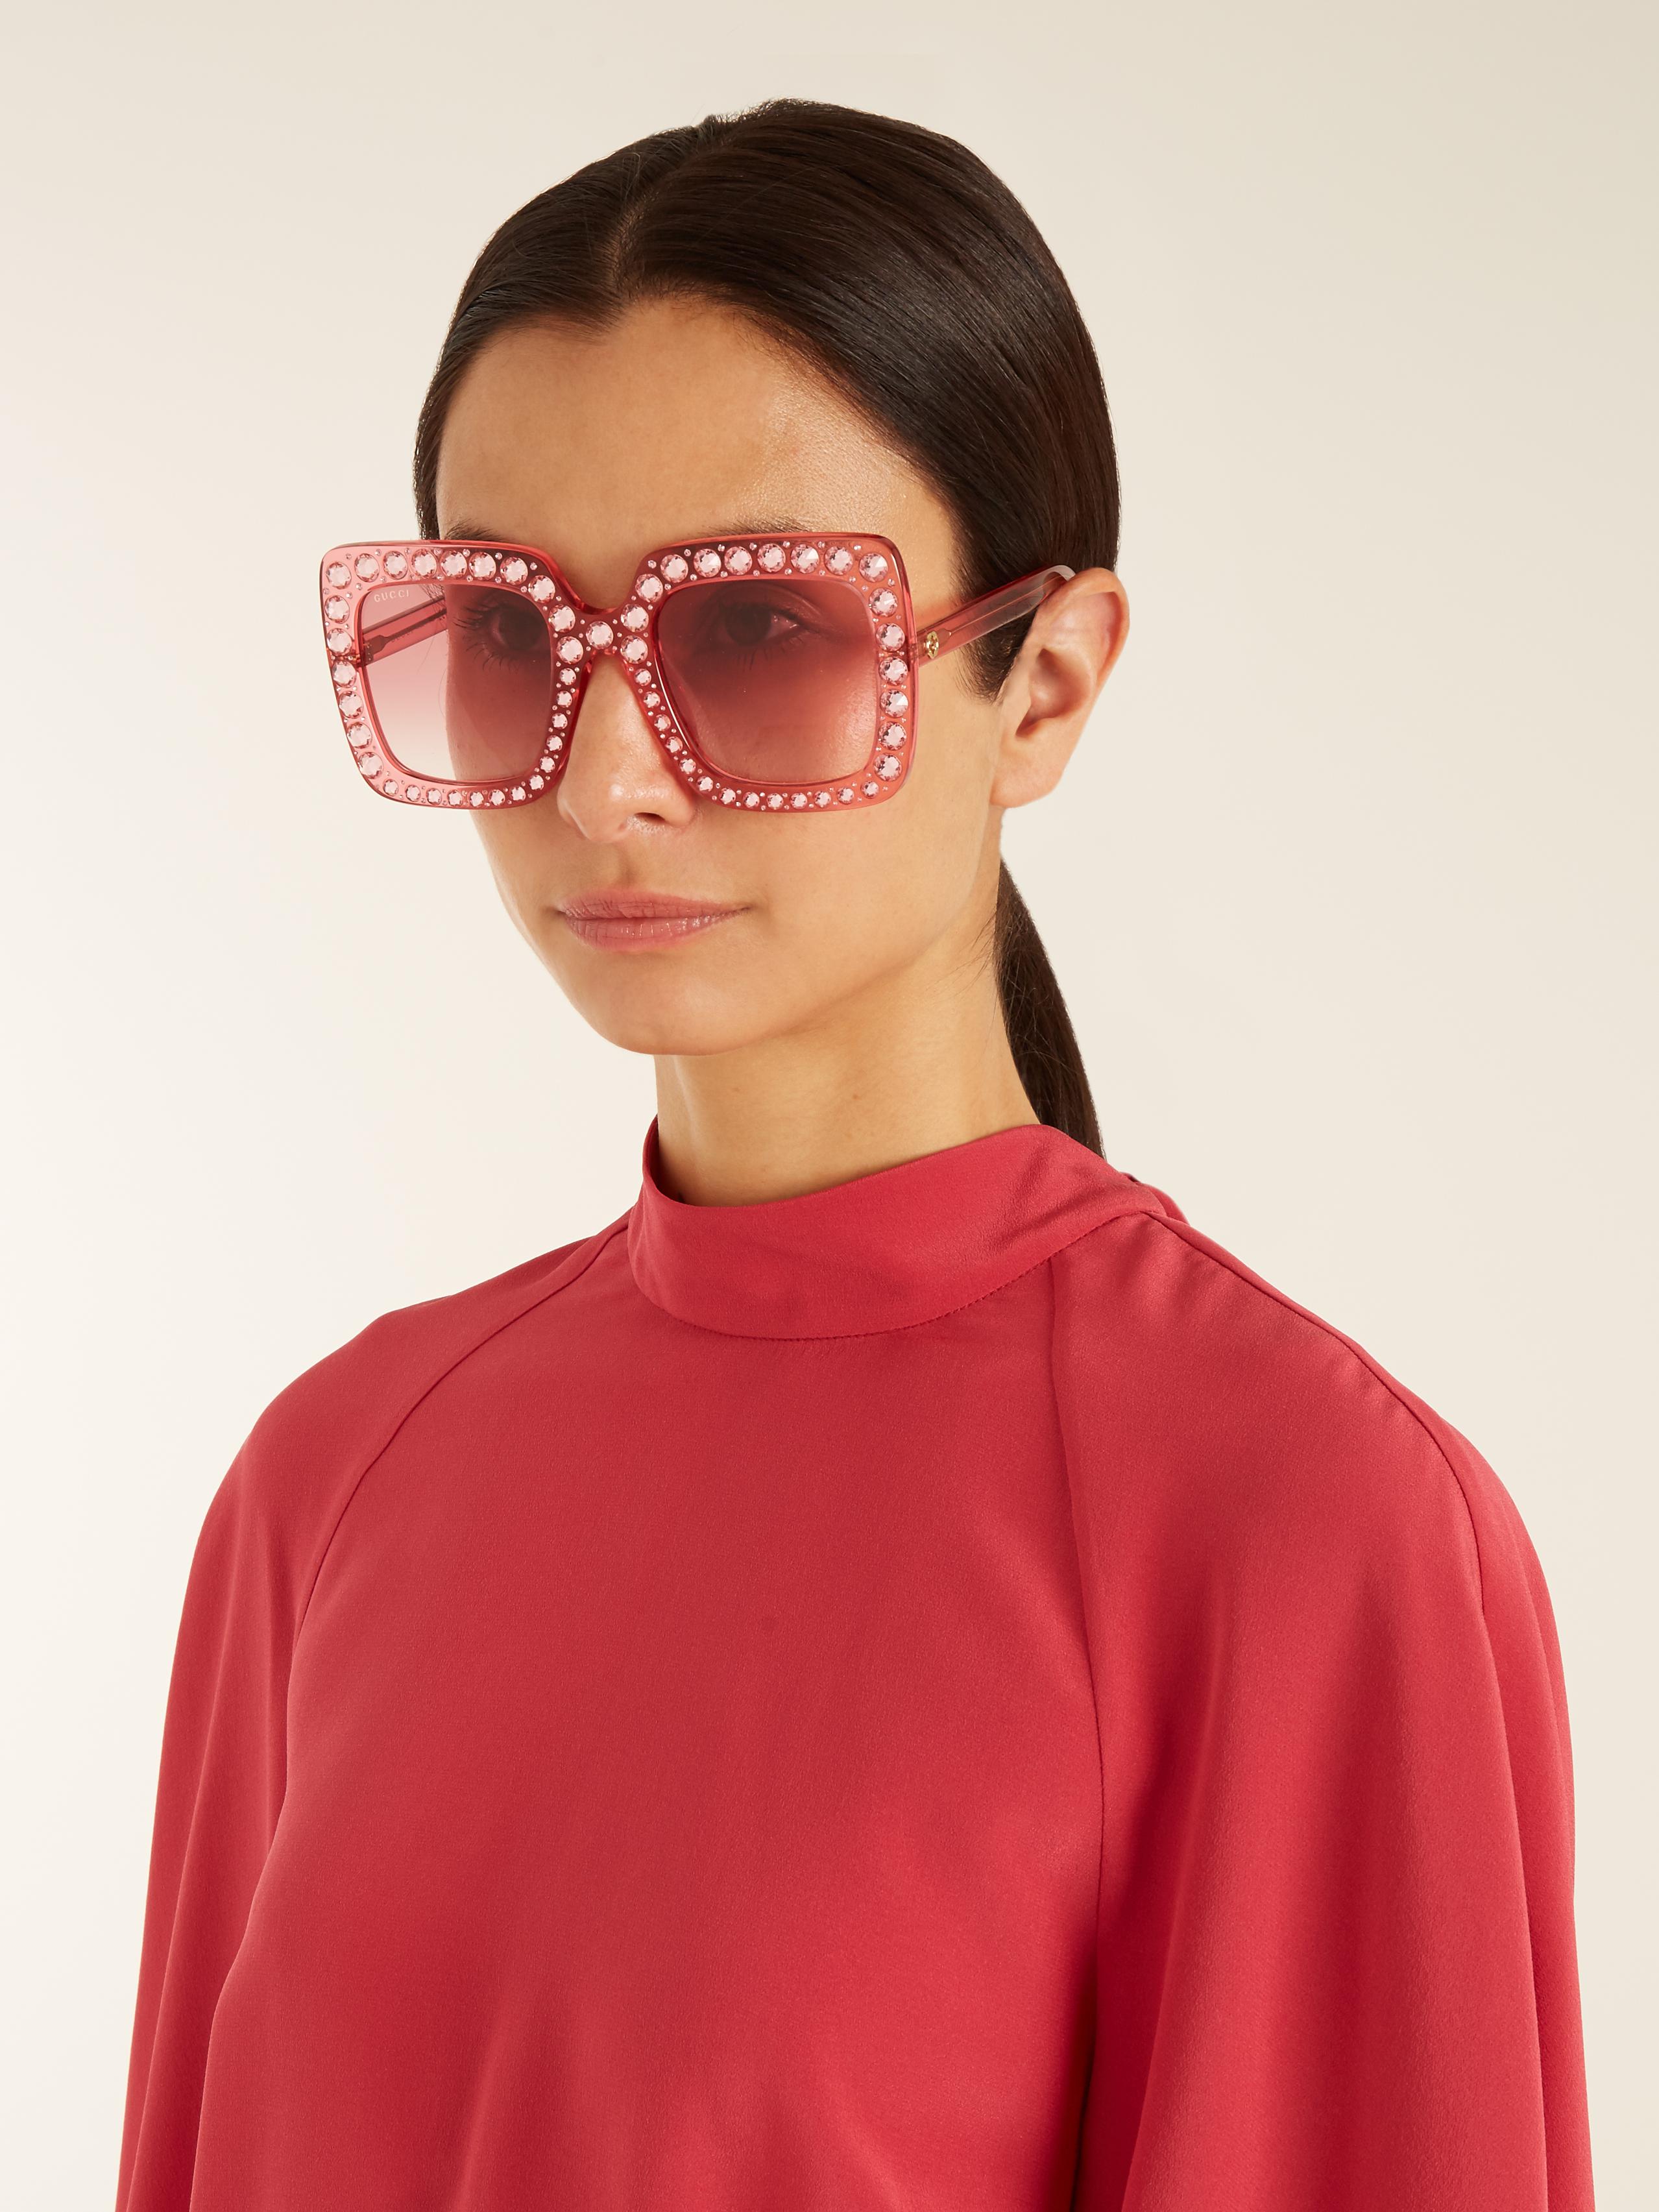 Gucci Oversized Embellished Square-frame Sunglasses in Pink | Lyst